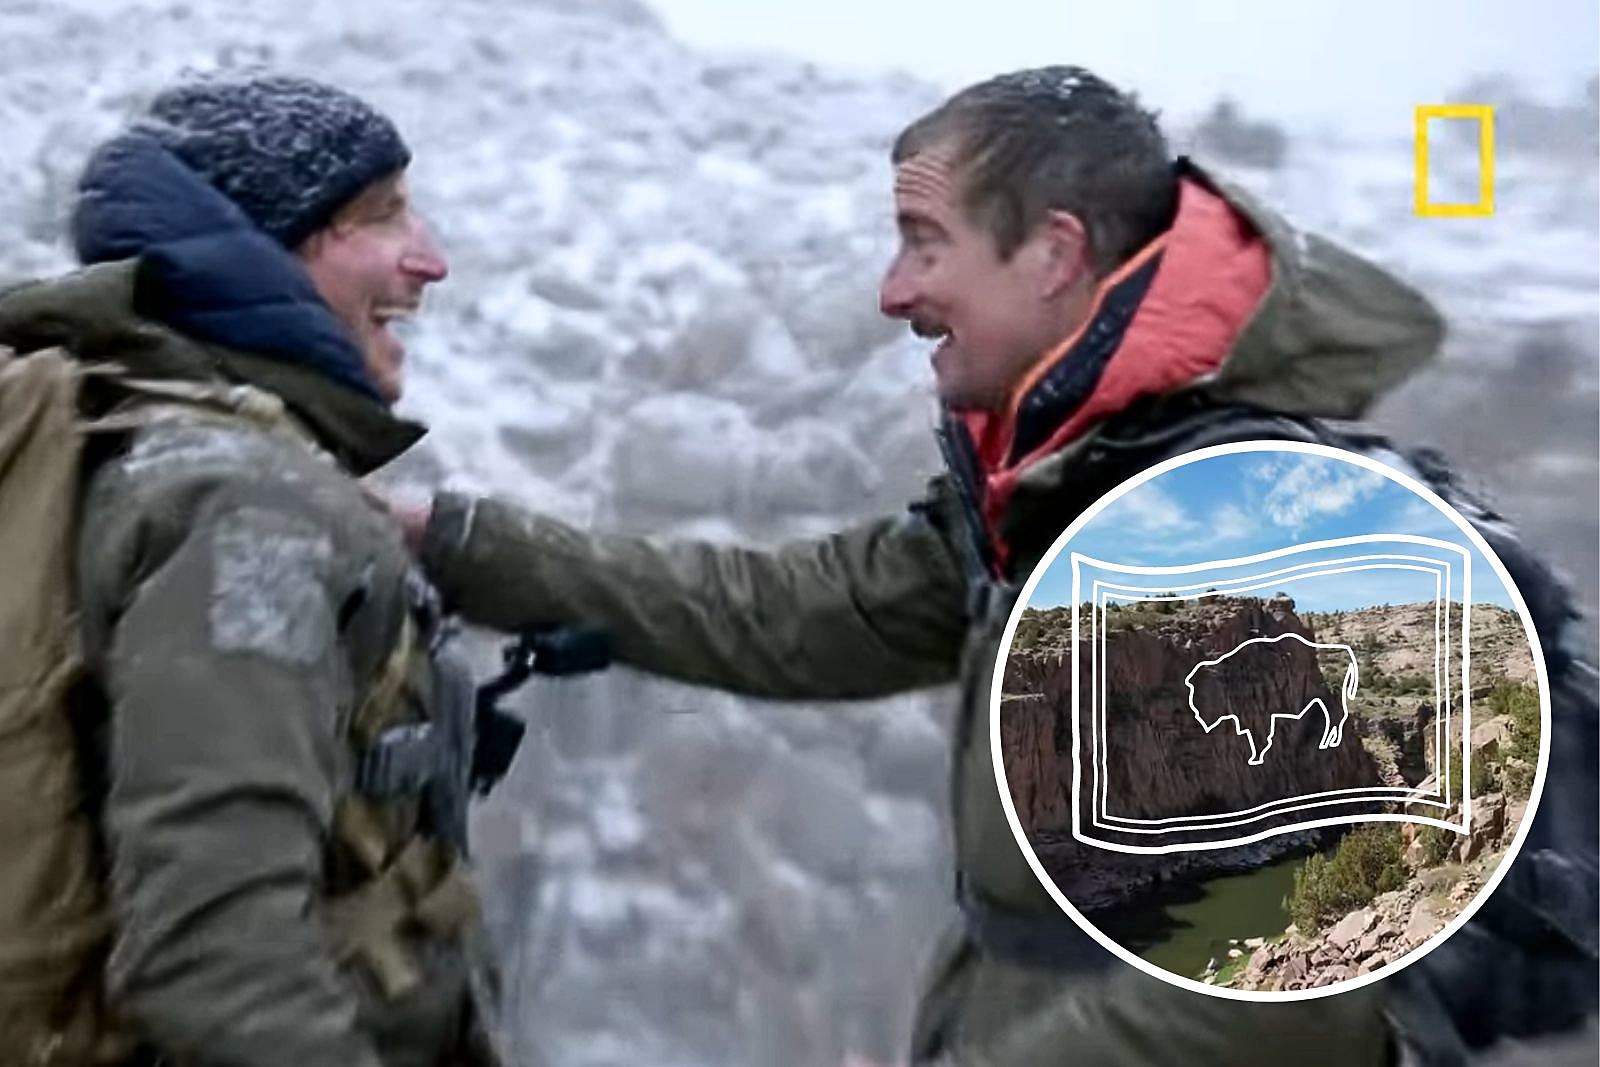 I Survived Bear Grylls: How To Watch - Outdoors with Bear Grylls